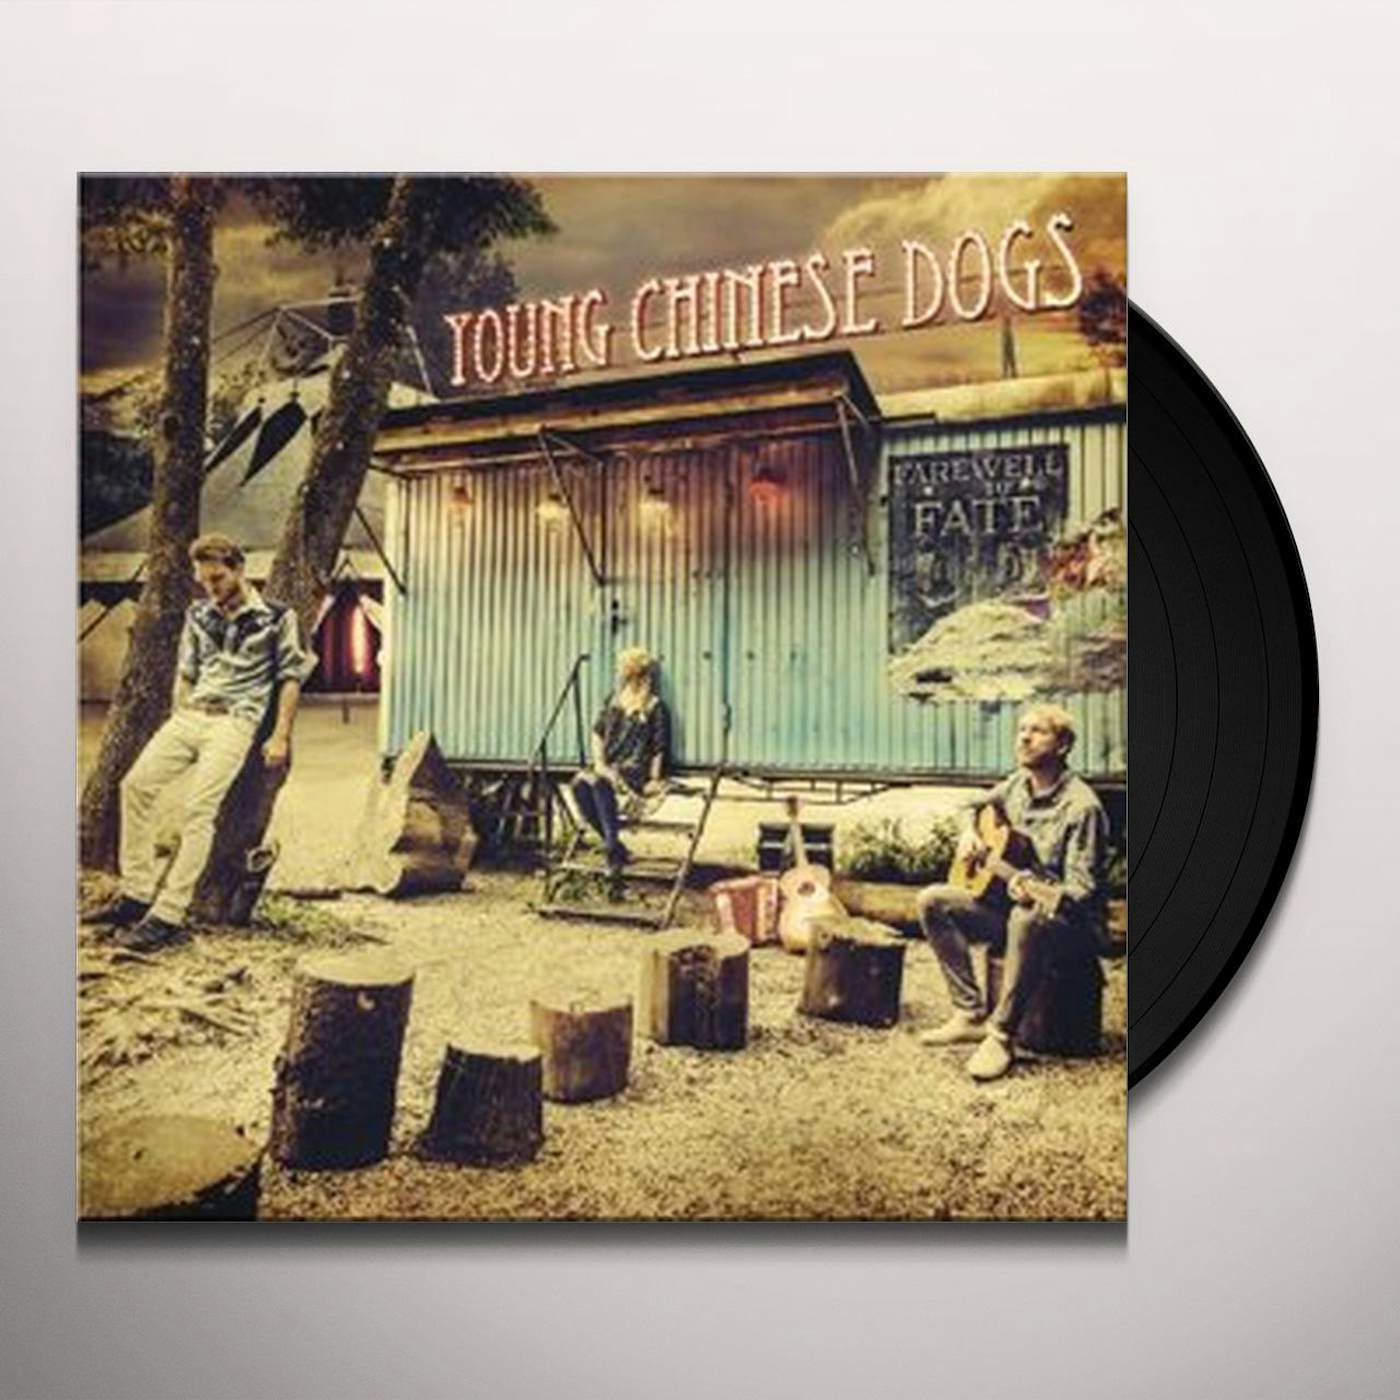 Young Chinese Dogs Farewell to Fate Vinyl Record